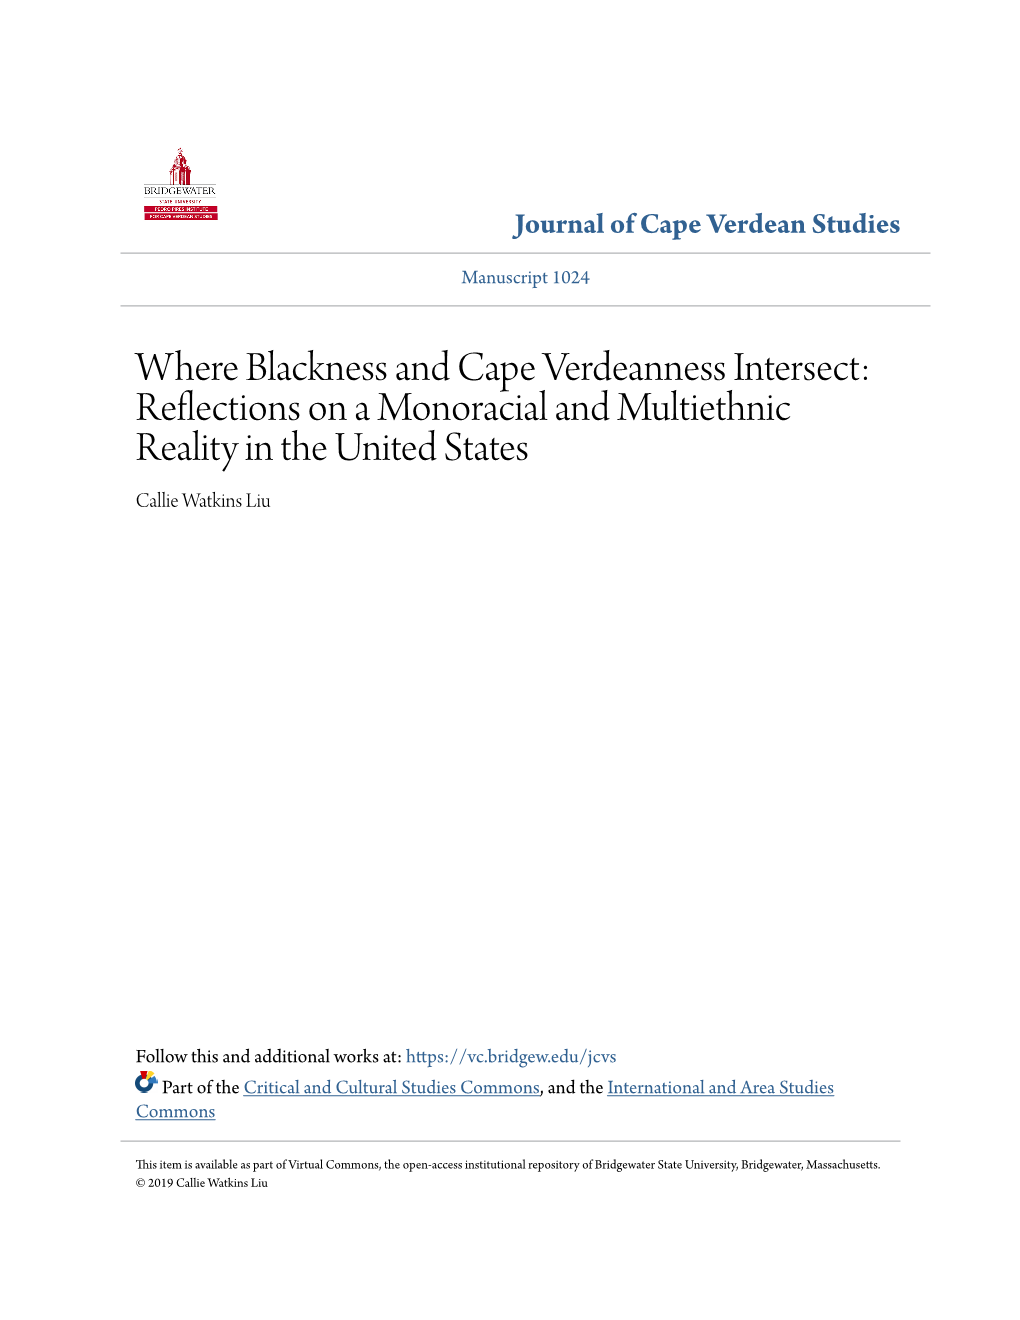 Where Blackness and Cape Verdeanness Intersect: Reflections on a Monoracial and Multiethnic Reality in the United States Callie Watkins Liu